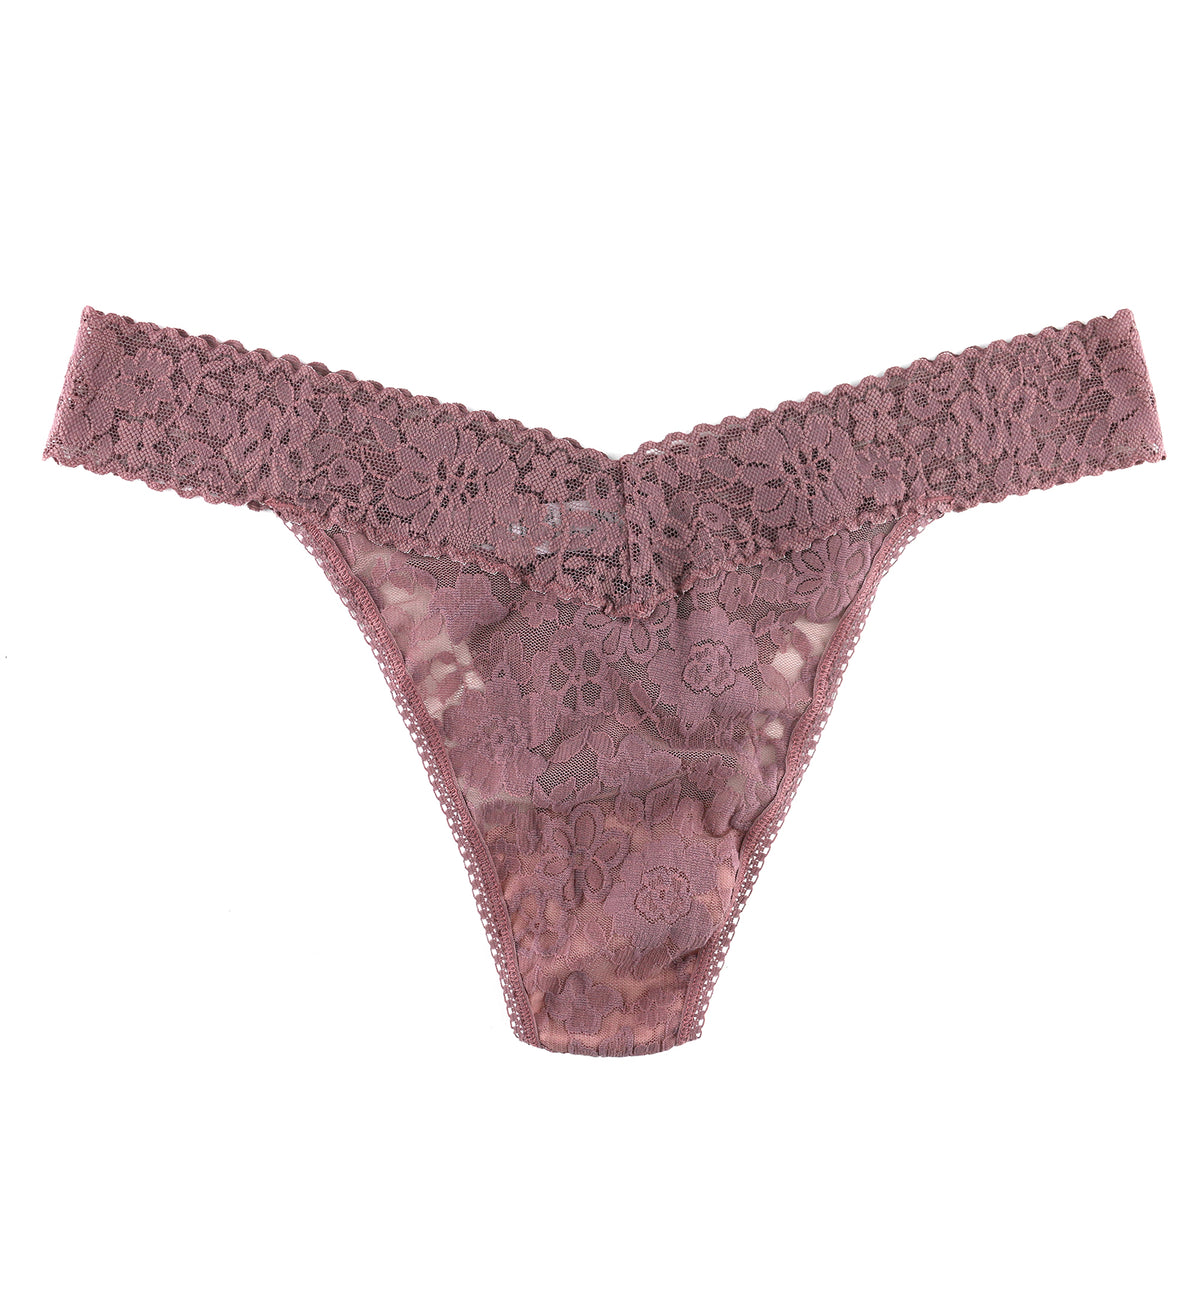 Hanky Panky Daily Lace Original Rise Thong PLUS (771101XP),Allspice - Allspice,One Size